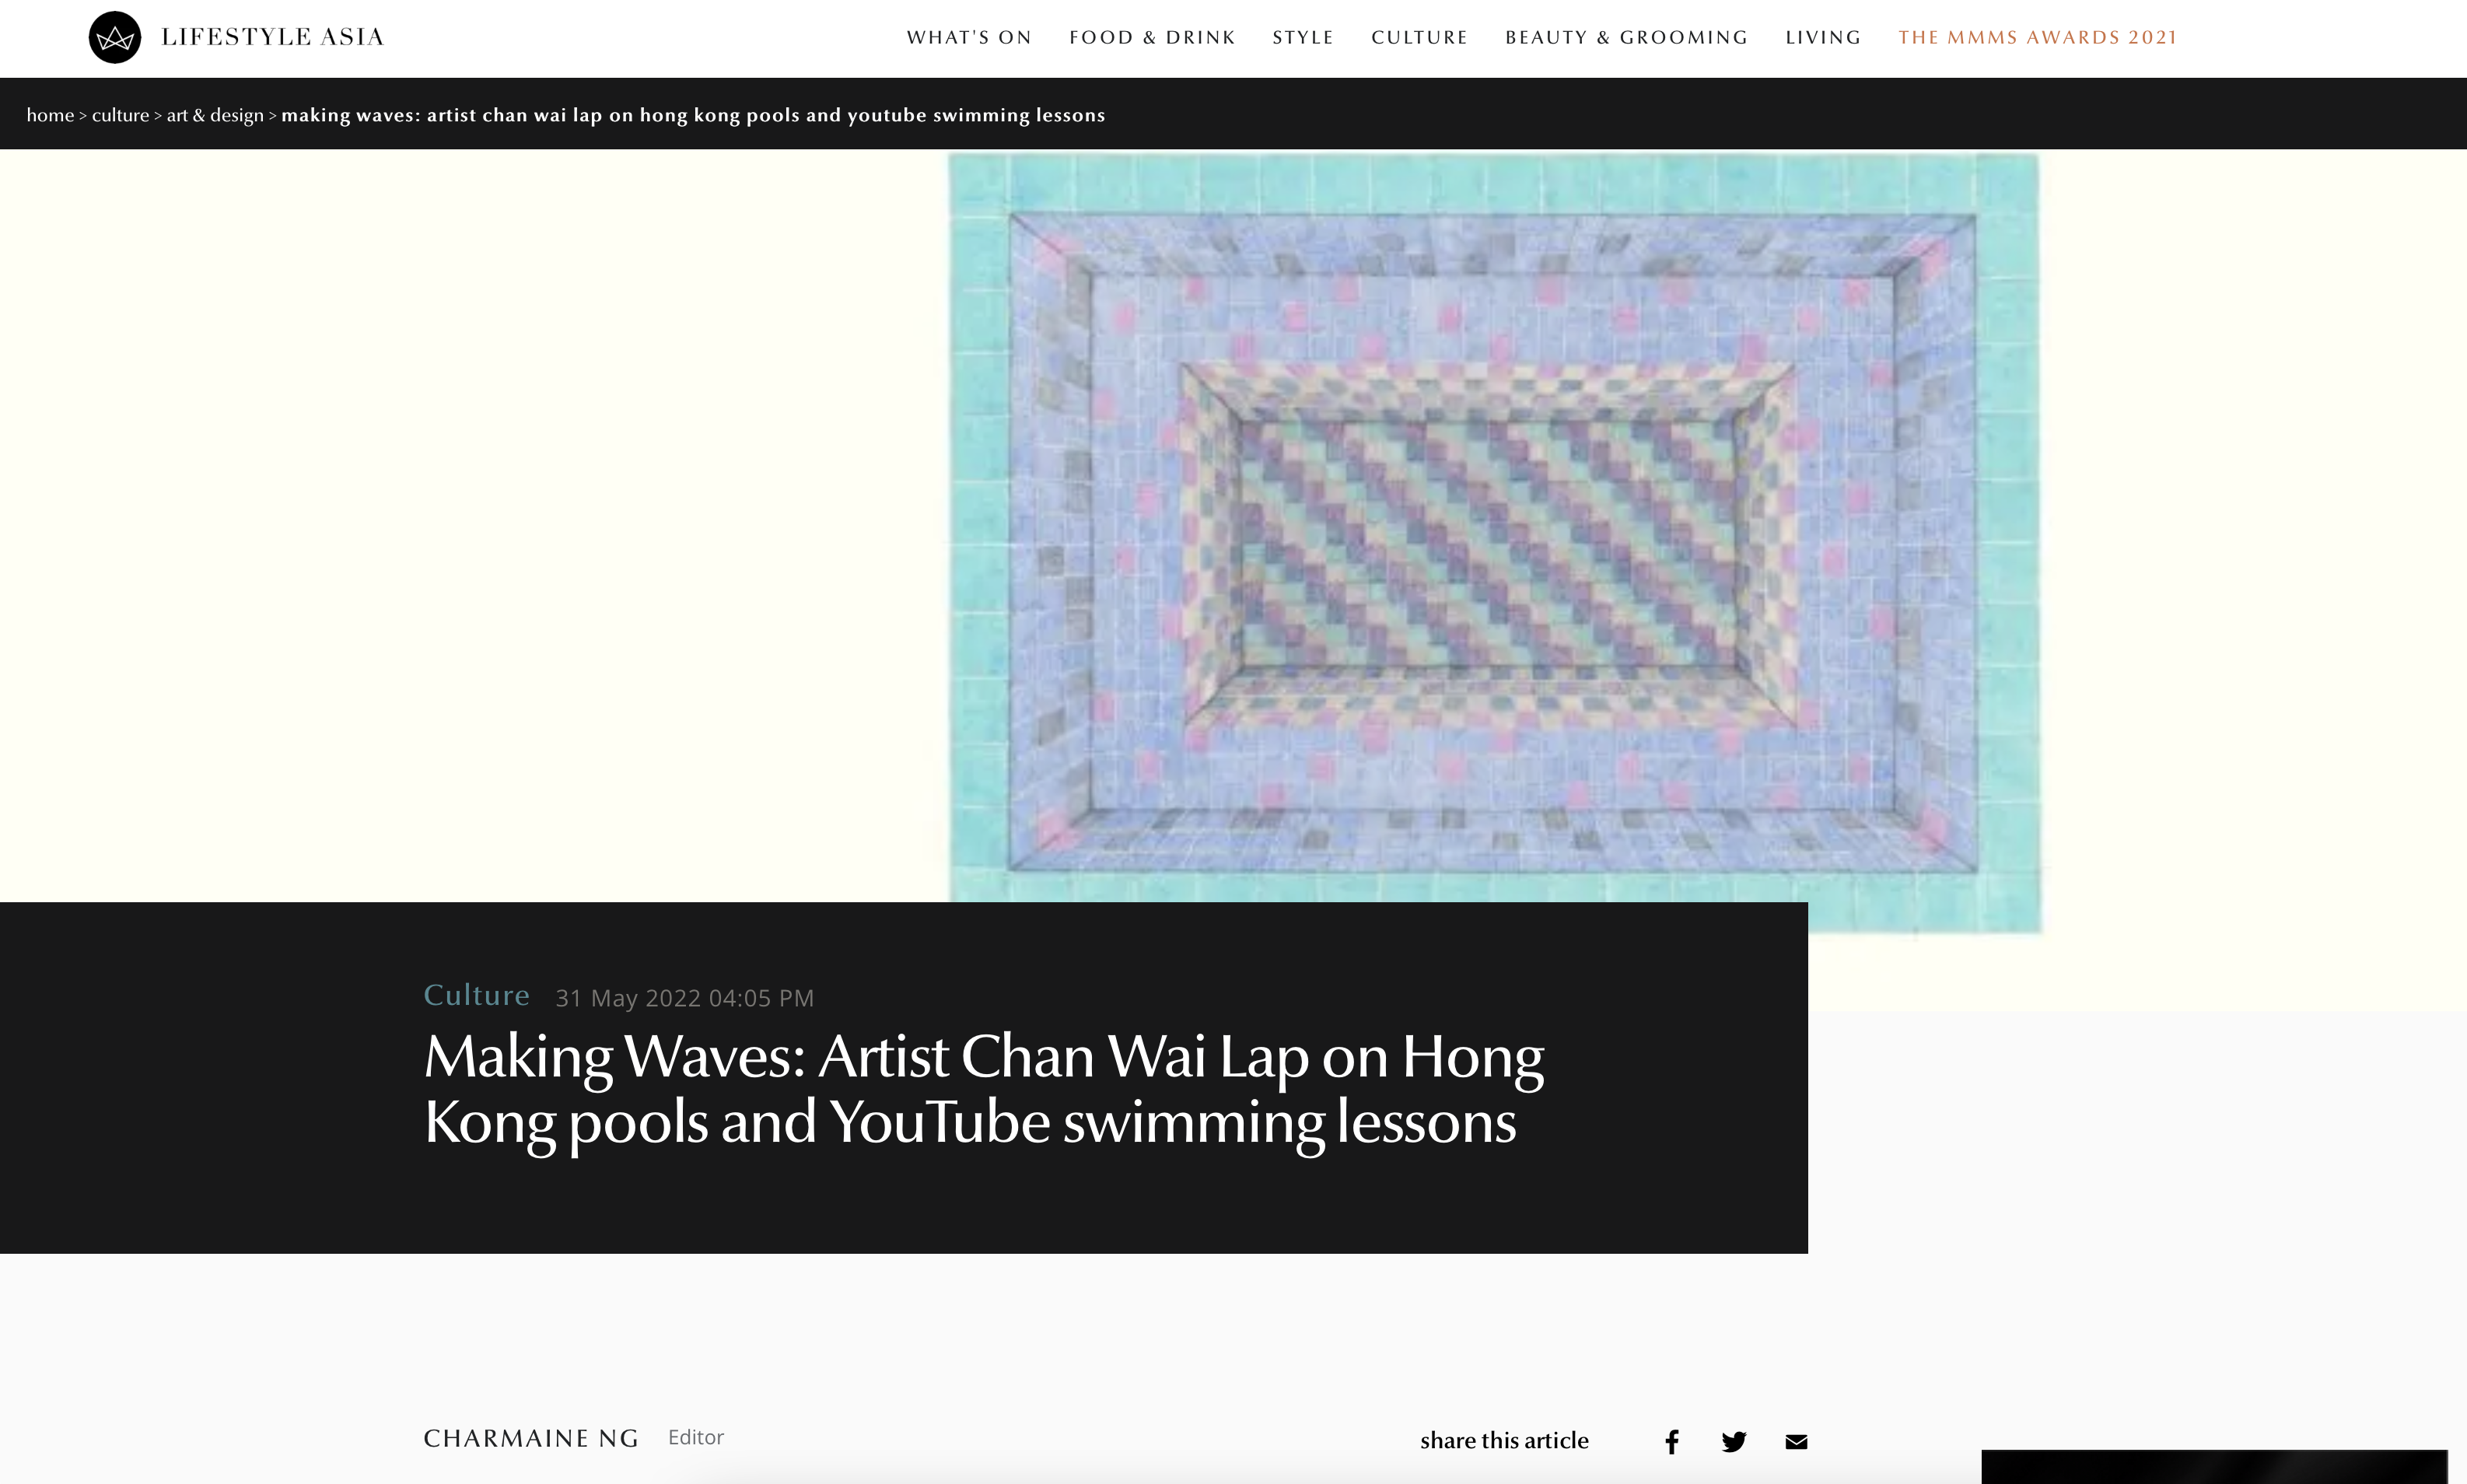 LIFESTYLE ASIA | making waves: artist chan wai lap on hong kong pools and youtube swimming lessons